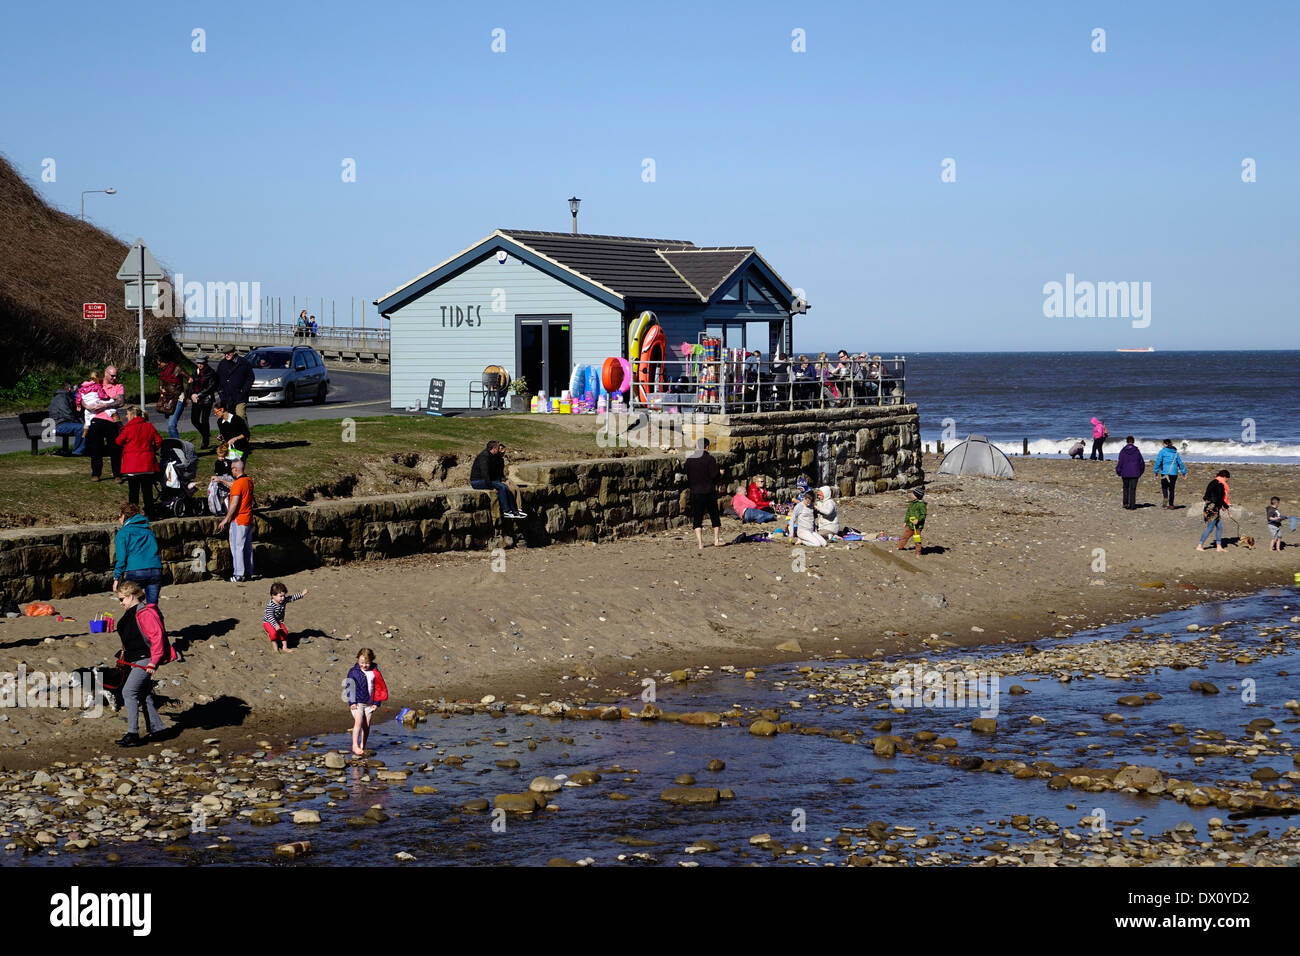 Holiday makers on the beach by the Tides café at Sandsend near Whitby North Yorkshire on a sunny but chilly spring day Stock Photo